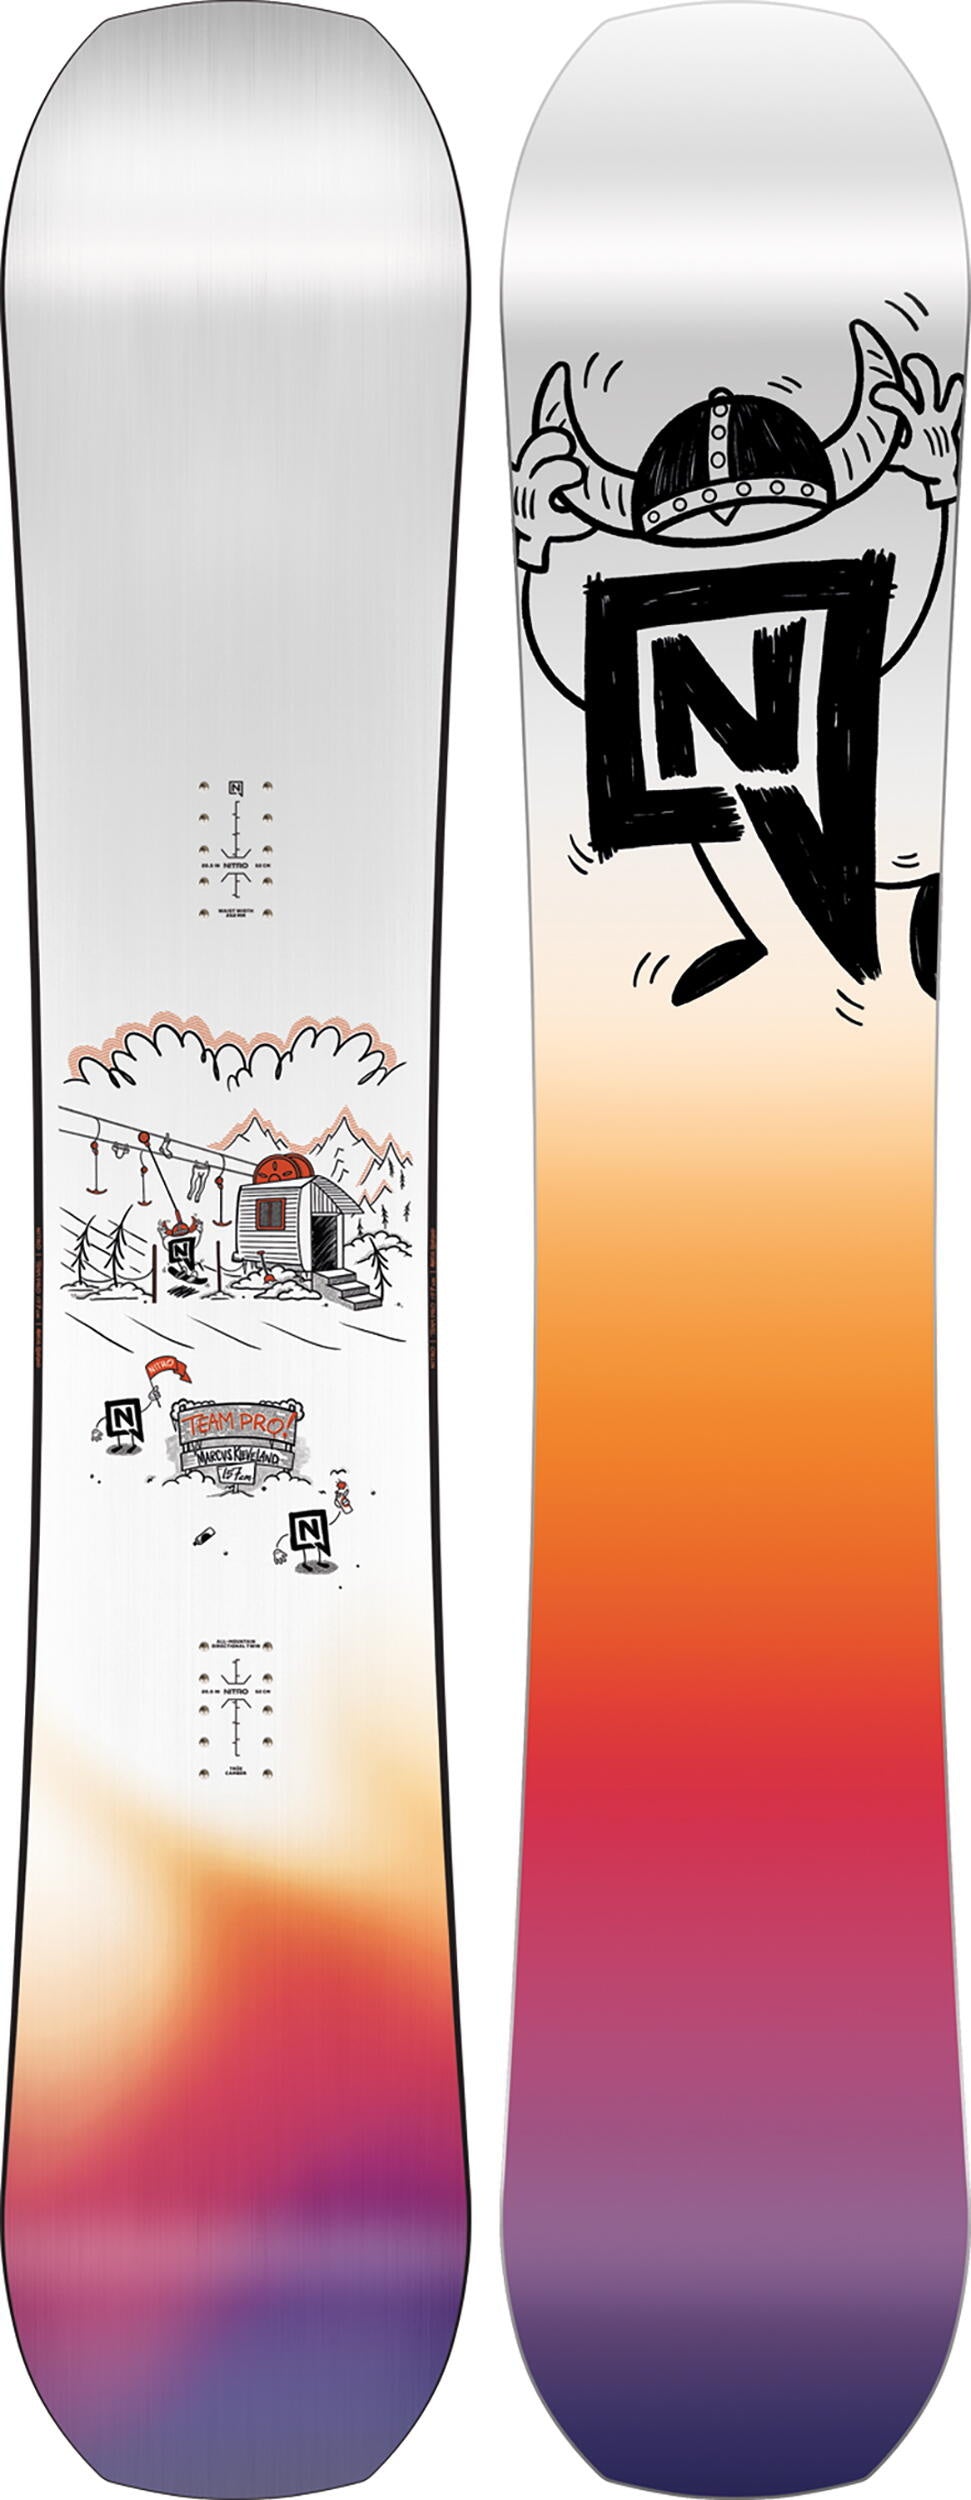 The Team Pro Marcus Kleveland's specifically engineered construction gives a little extra performance to "level up" your riding no matter how big or small the trick effortlessly with a universally loved board shape for just cruising the go-to run at the resort.